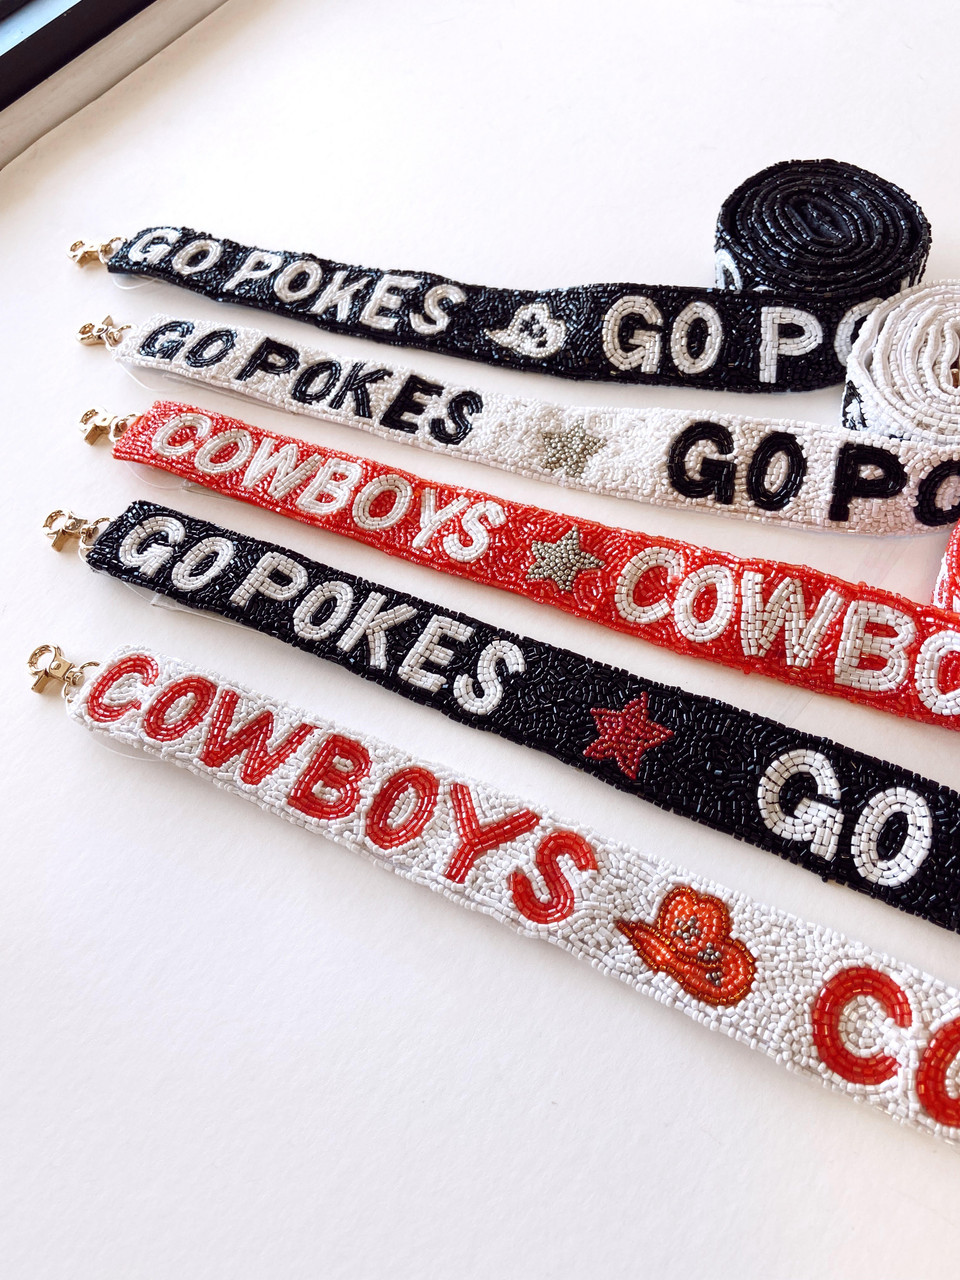 Lashicorn Beaded Purse Strap Oklahoma Black and Orange State Cowboy Hats College Game Day Clear Handbag Replacement Strap Stadium Football